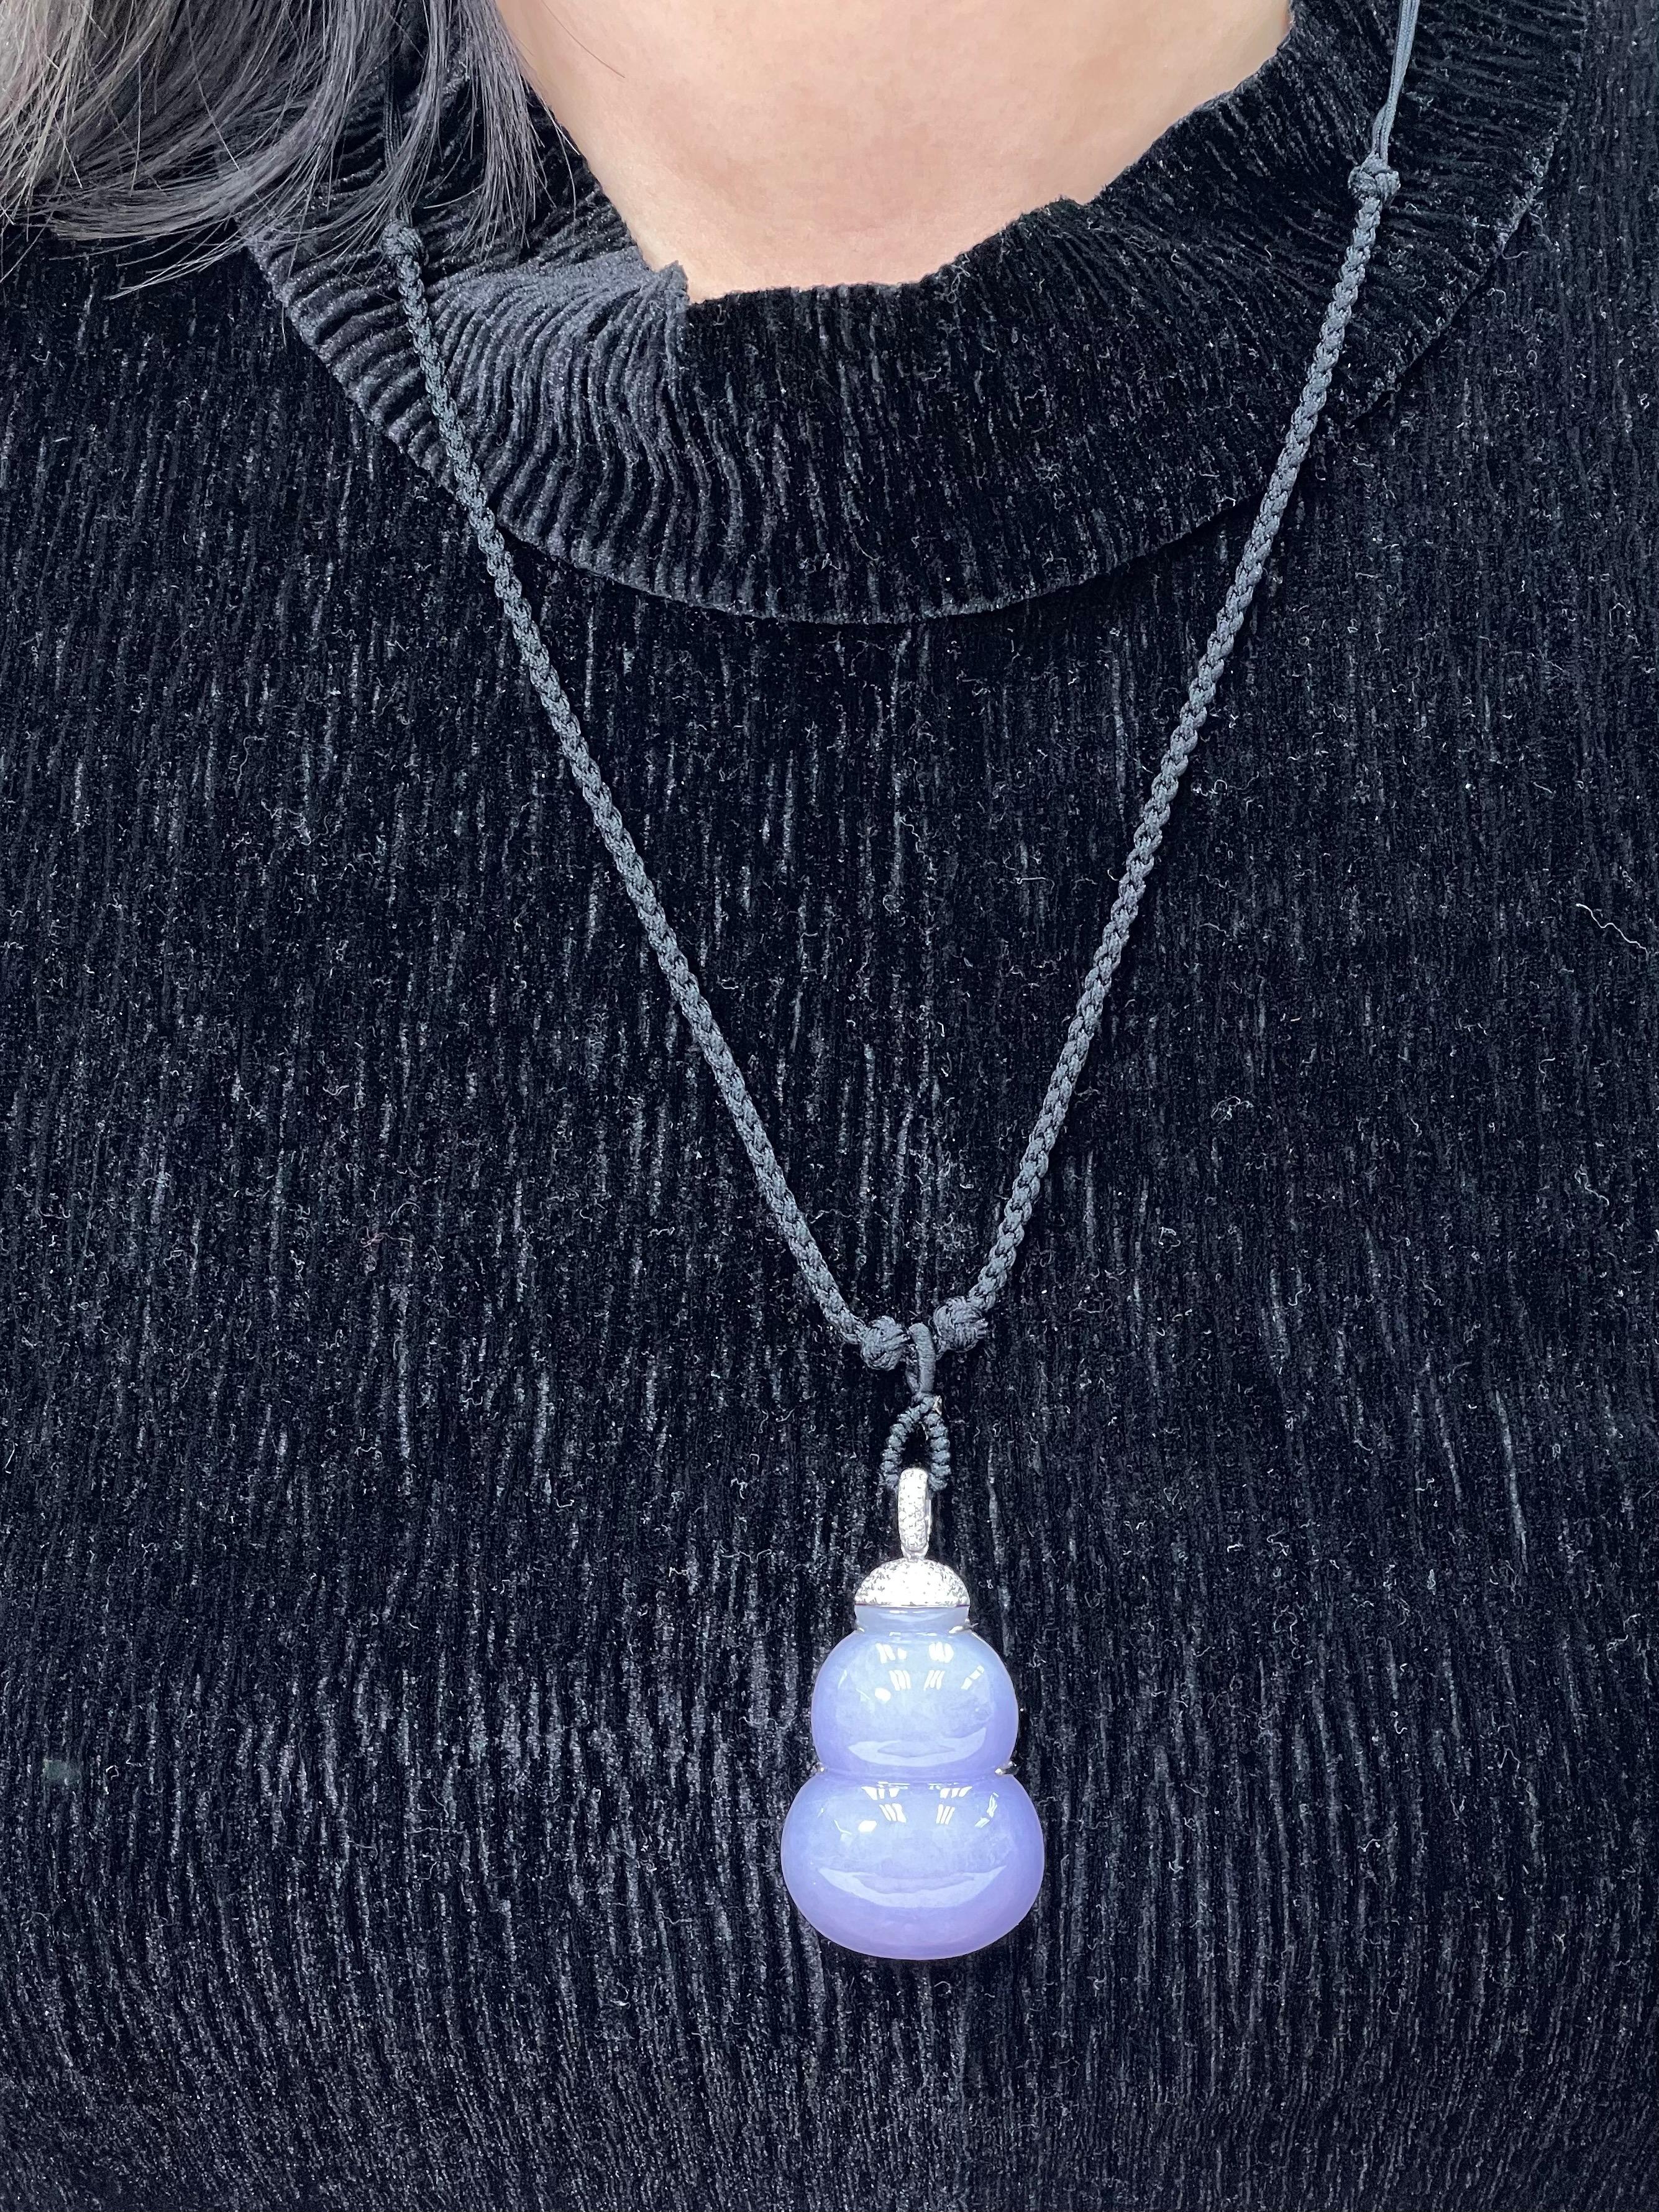 Here is an important natural lavender Jadeite Jade and diamond pendant necklace with excellent purple color. This is a substantial STATEMENT piece! The size is impressive but it also has thickness (about half inch thick) Most jade of this size would